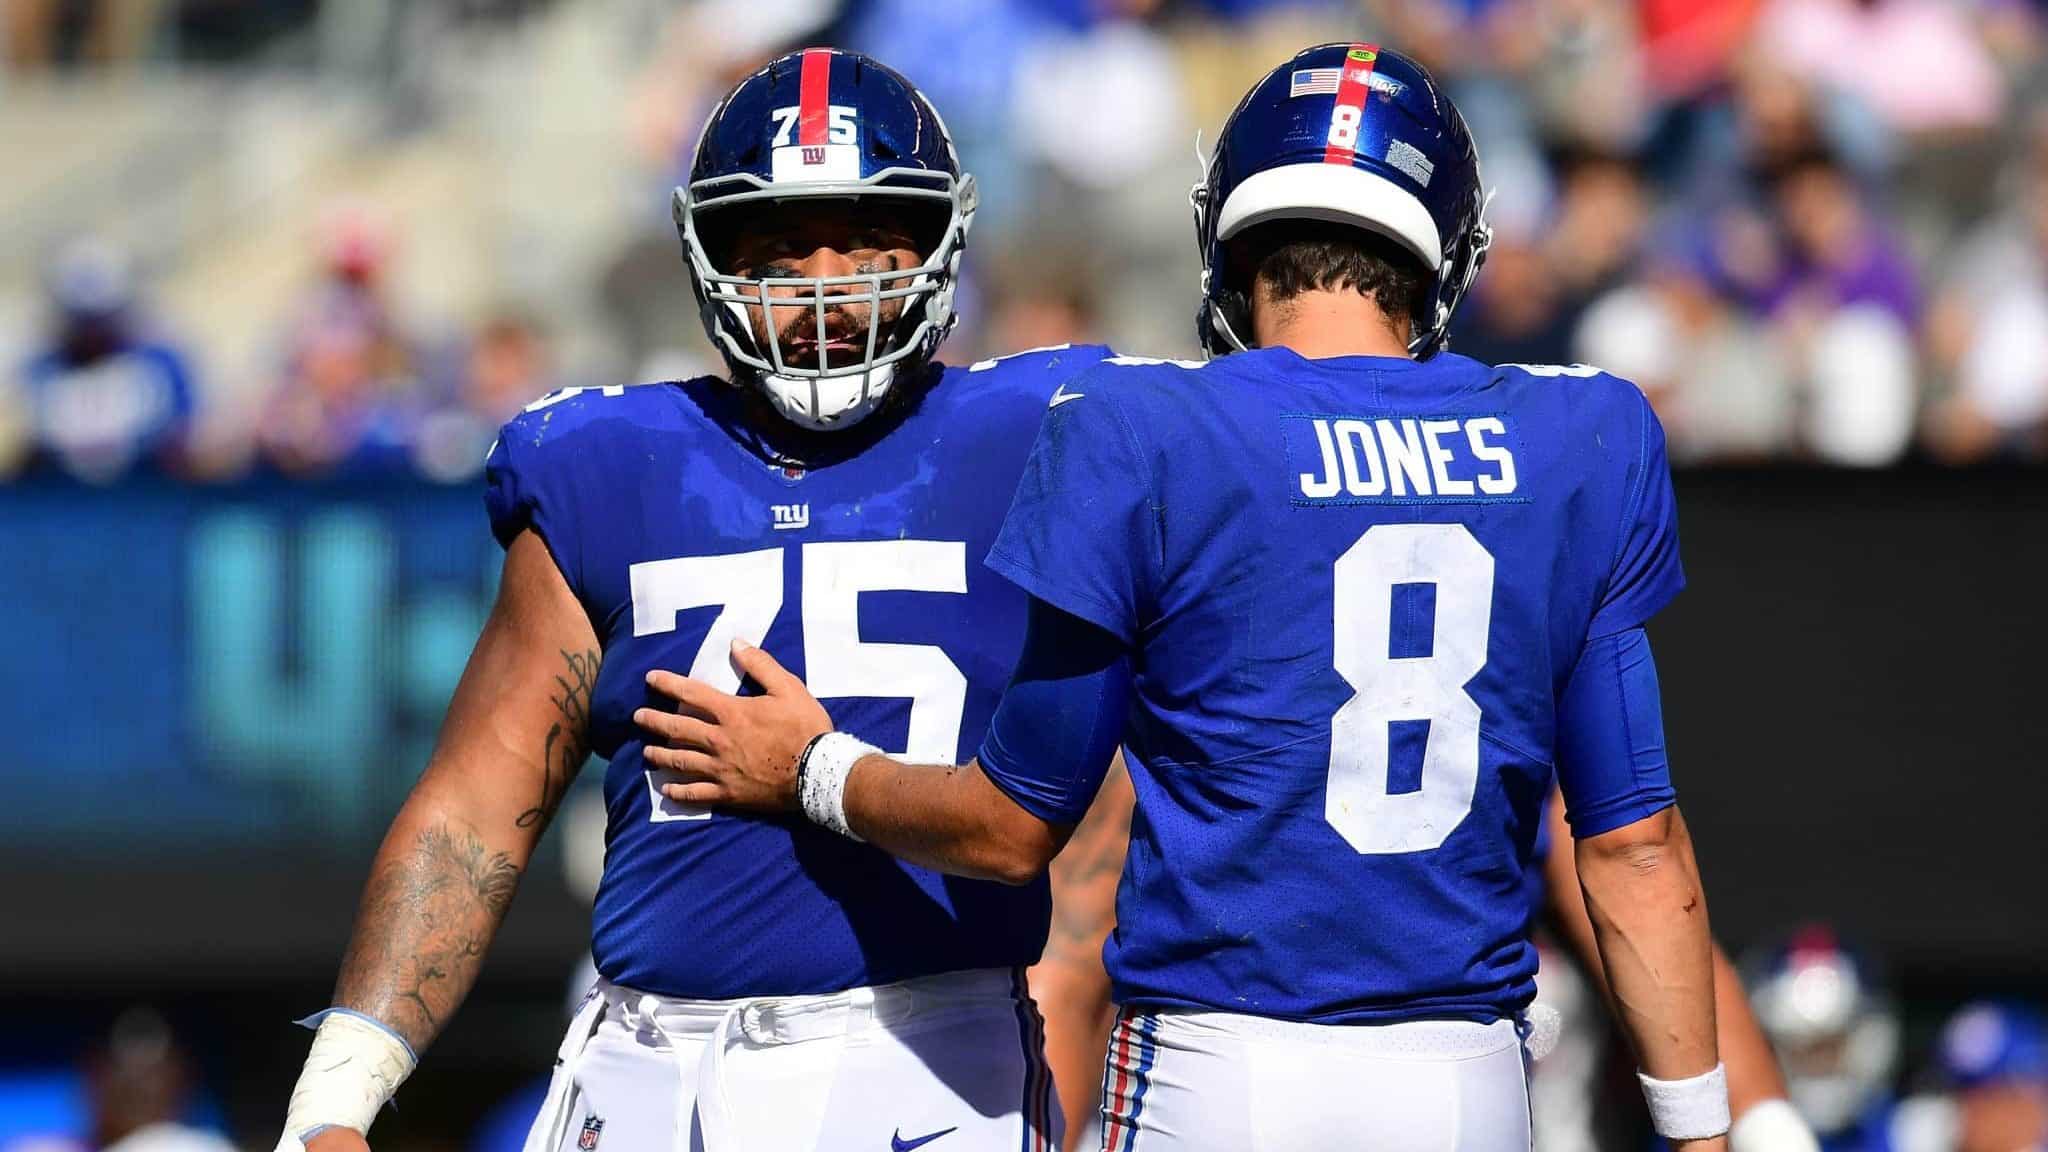 EAST RUTHERFORD, NEW JERSEY - SEPTEMBER 29: Daniel Jones #8 and Jon Halapio #75 of the New York Giants communicate during their game against the Washington Redskins at MetLife Stadium on September 29, 2019 in East Rutherford, New Jersey.